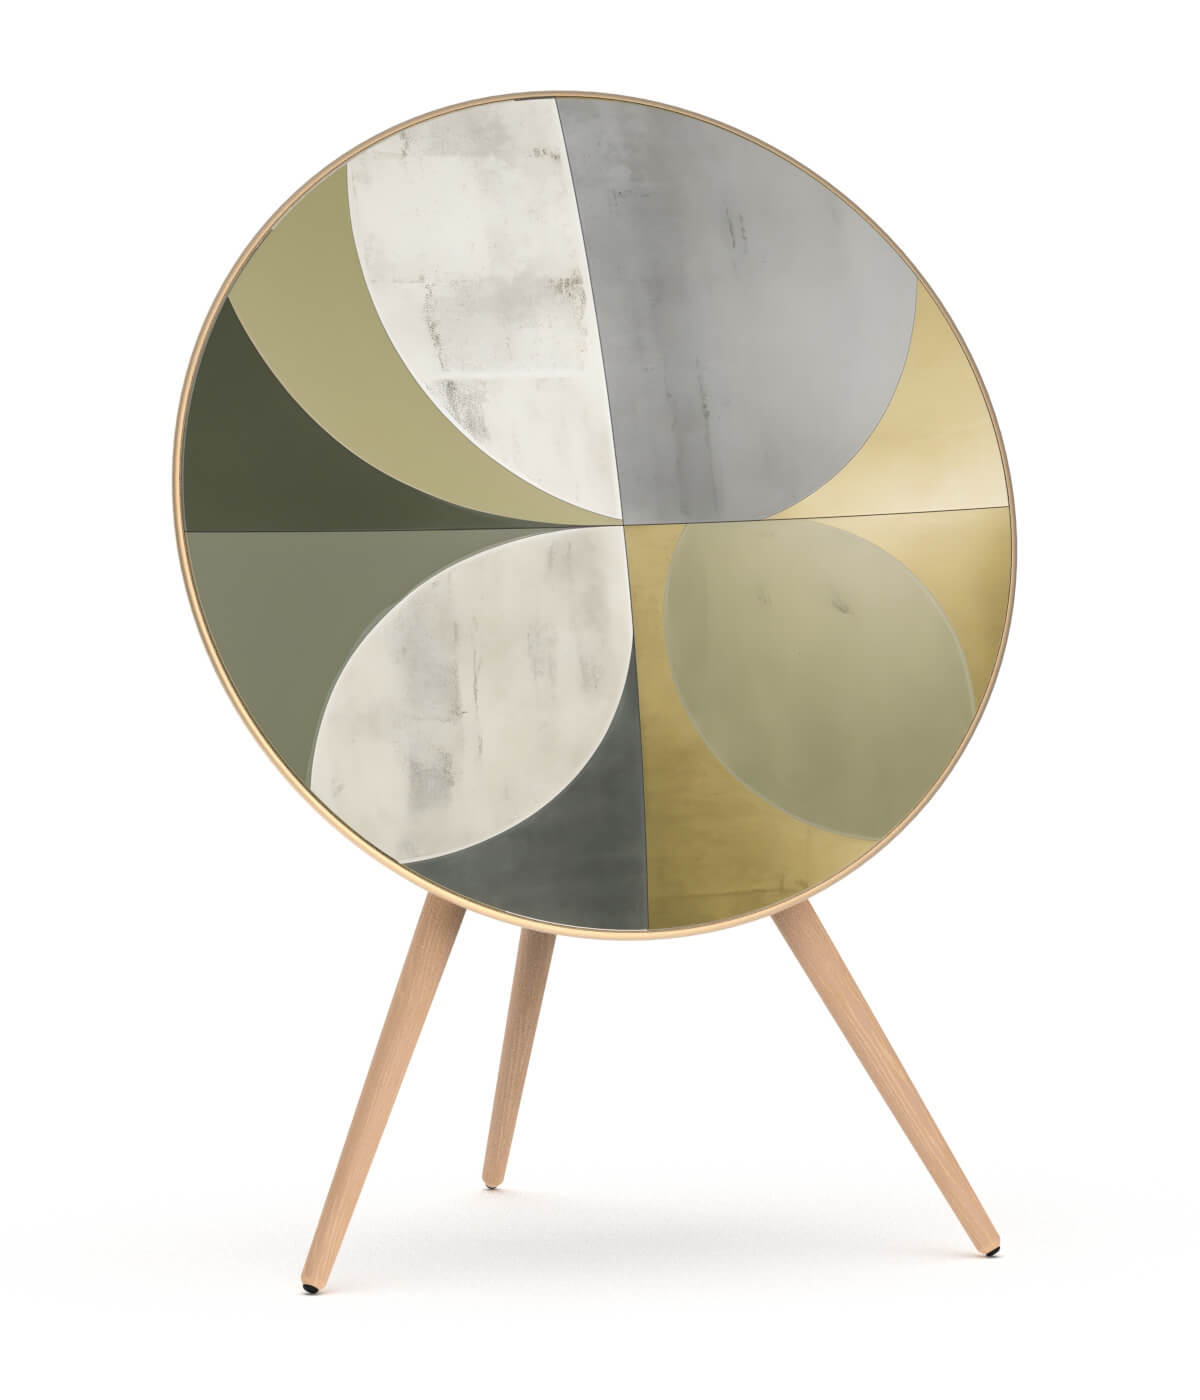 Skiniplay cover Lotus for Bang & Olufsen Beoplay A9 and Beosound A9 speaker